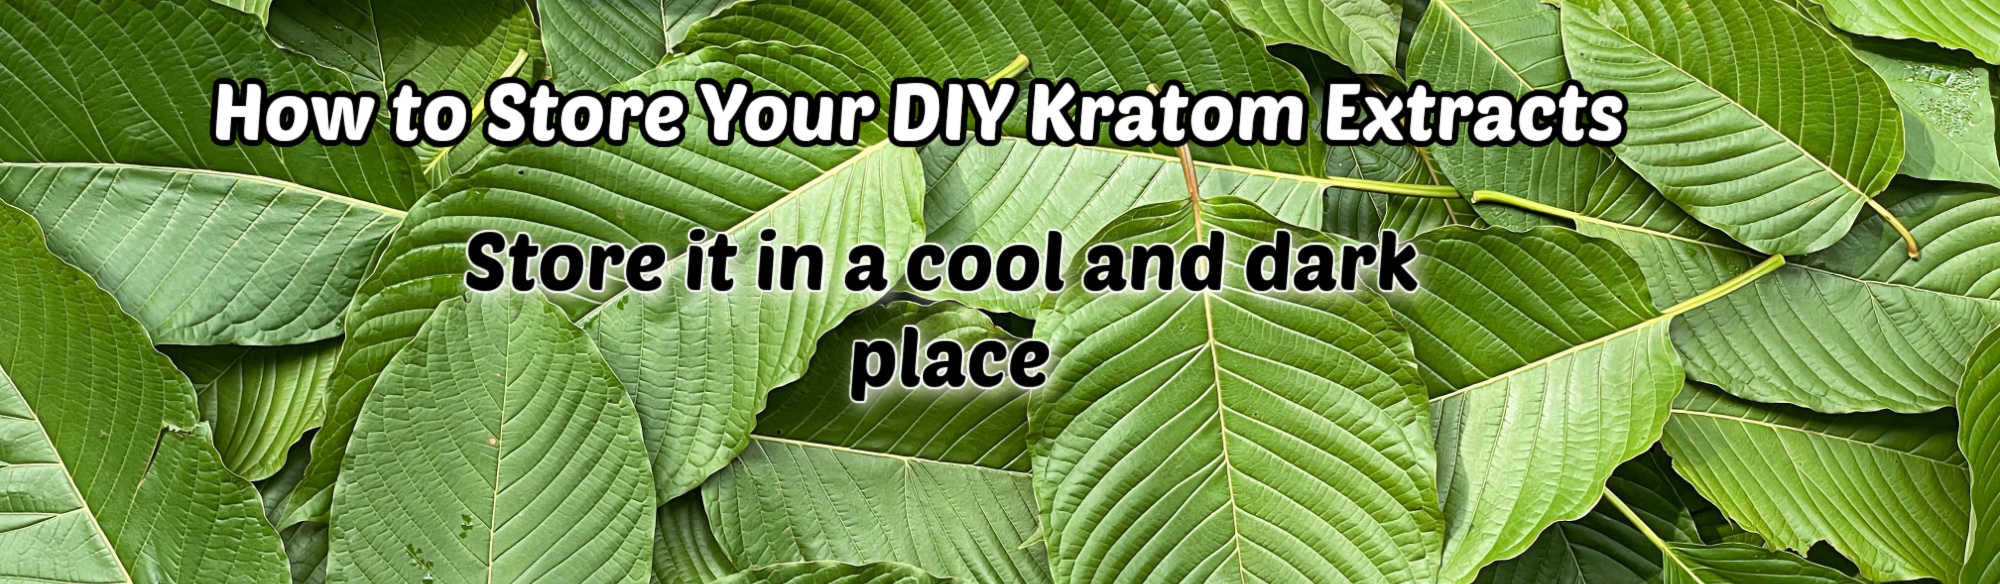 image of how to store diy kratom extracts